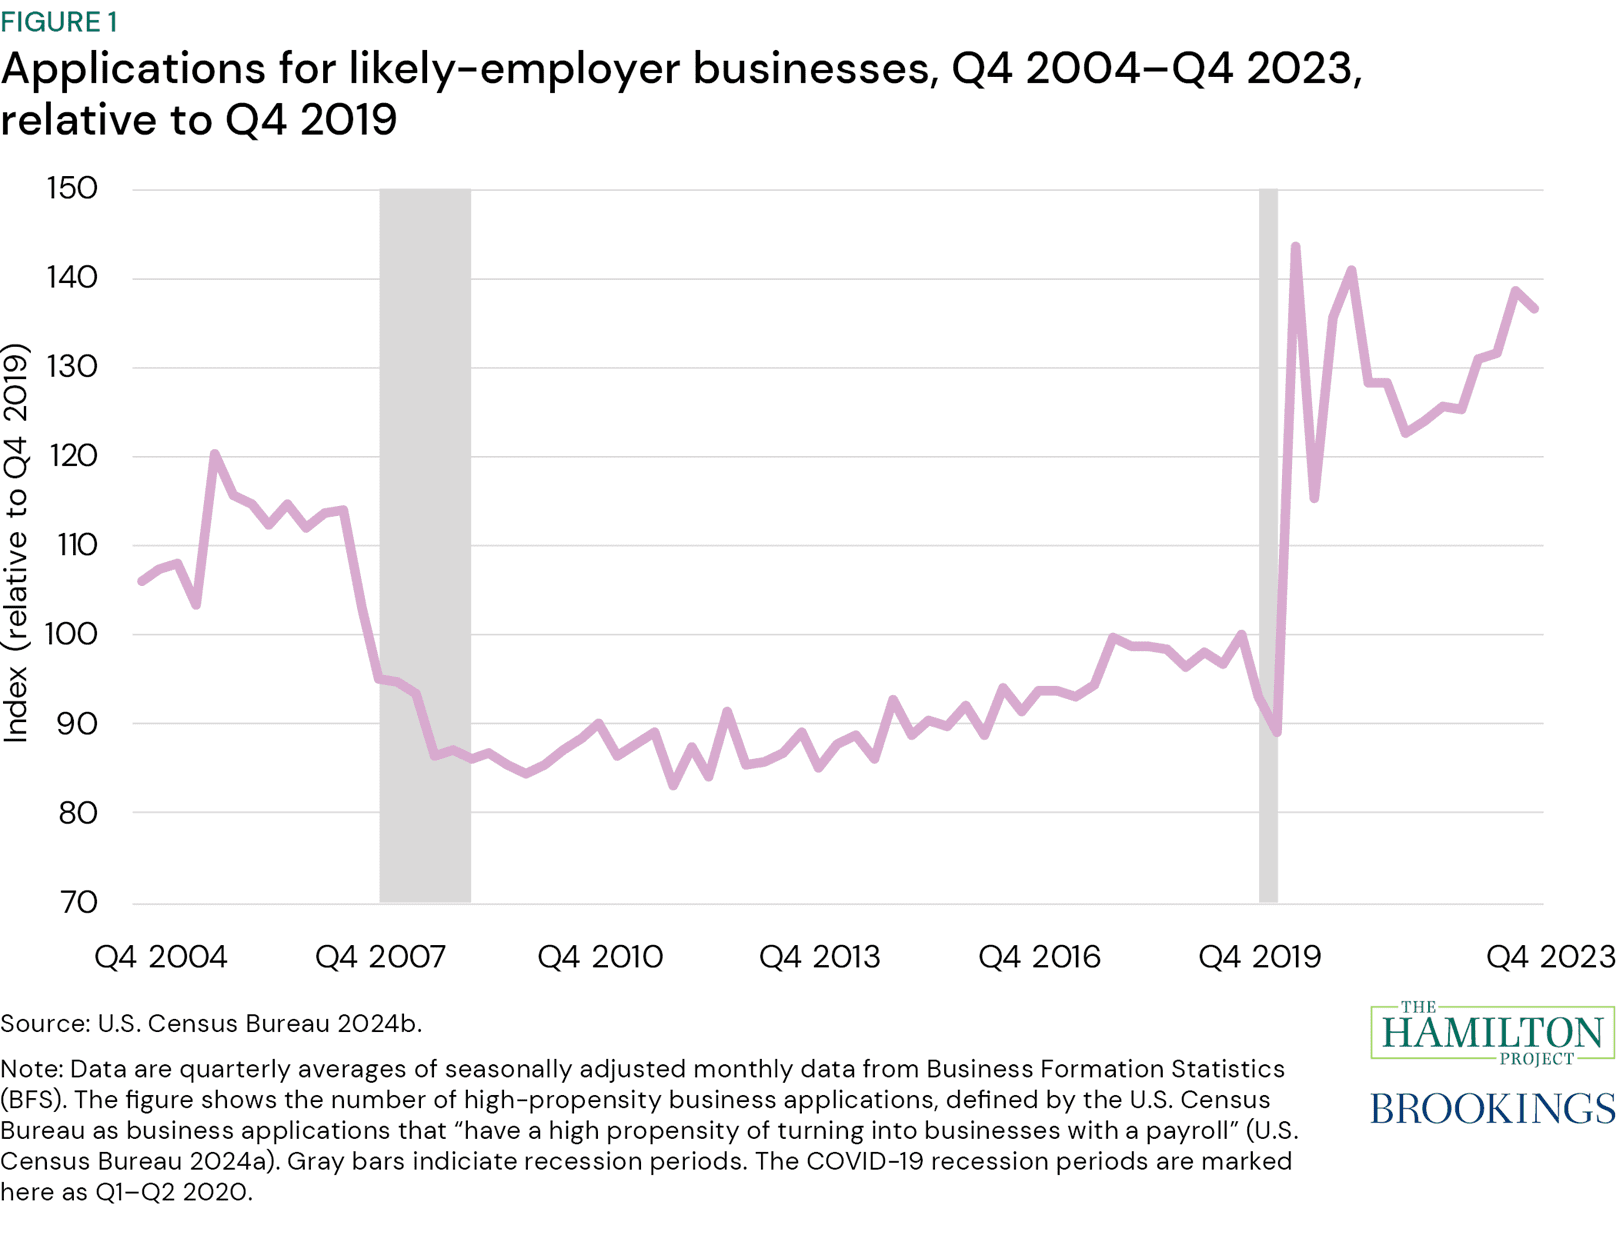 Figure 1: Applications for likely-employer businesses, Q4 2004-Q4 2023, relative to Q4 2019. Figure 1 shows, relative to the fourth quarter of 2019, the change in “high-propensity” business applications, which are applications of the type that have historically resulted in businesses with employees. 